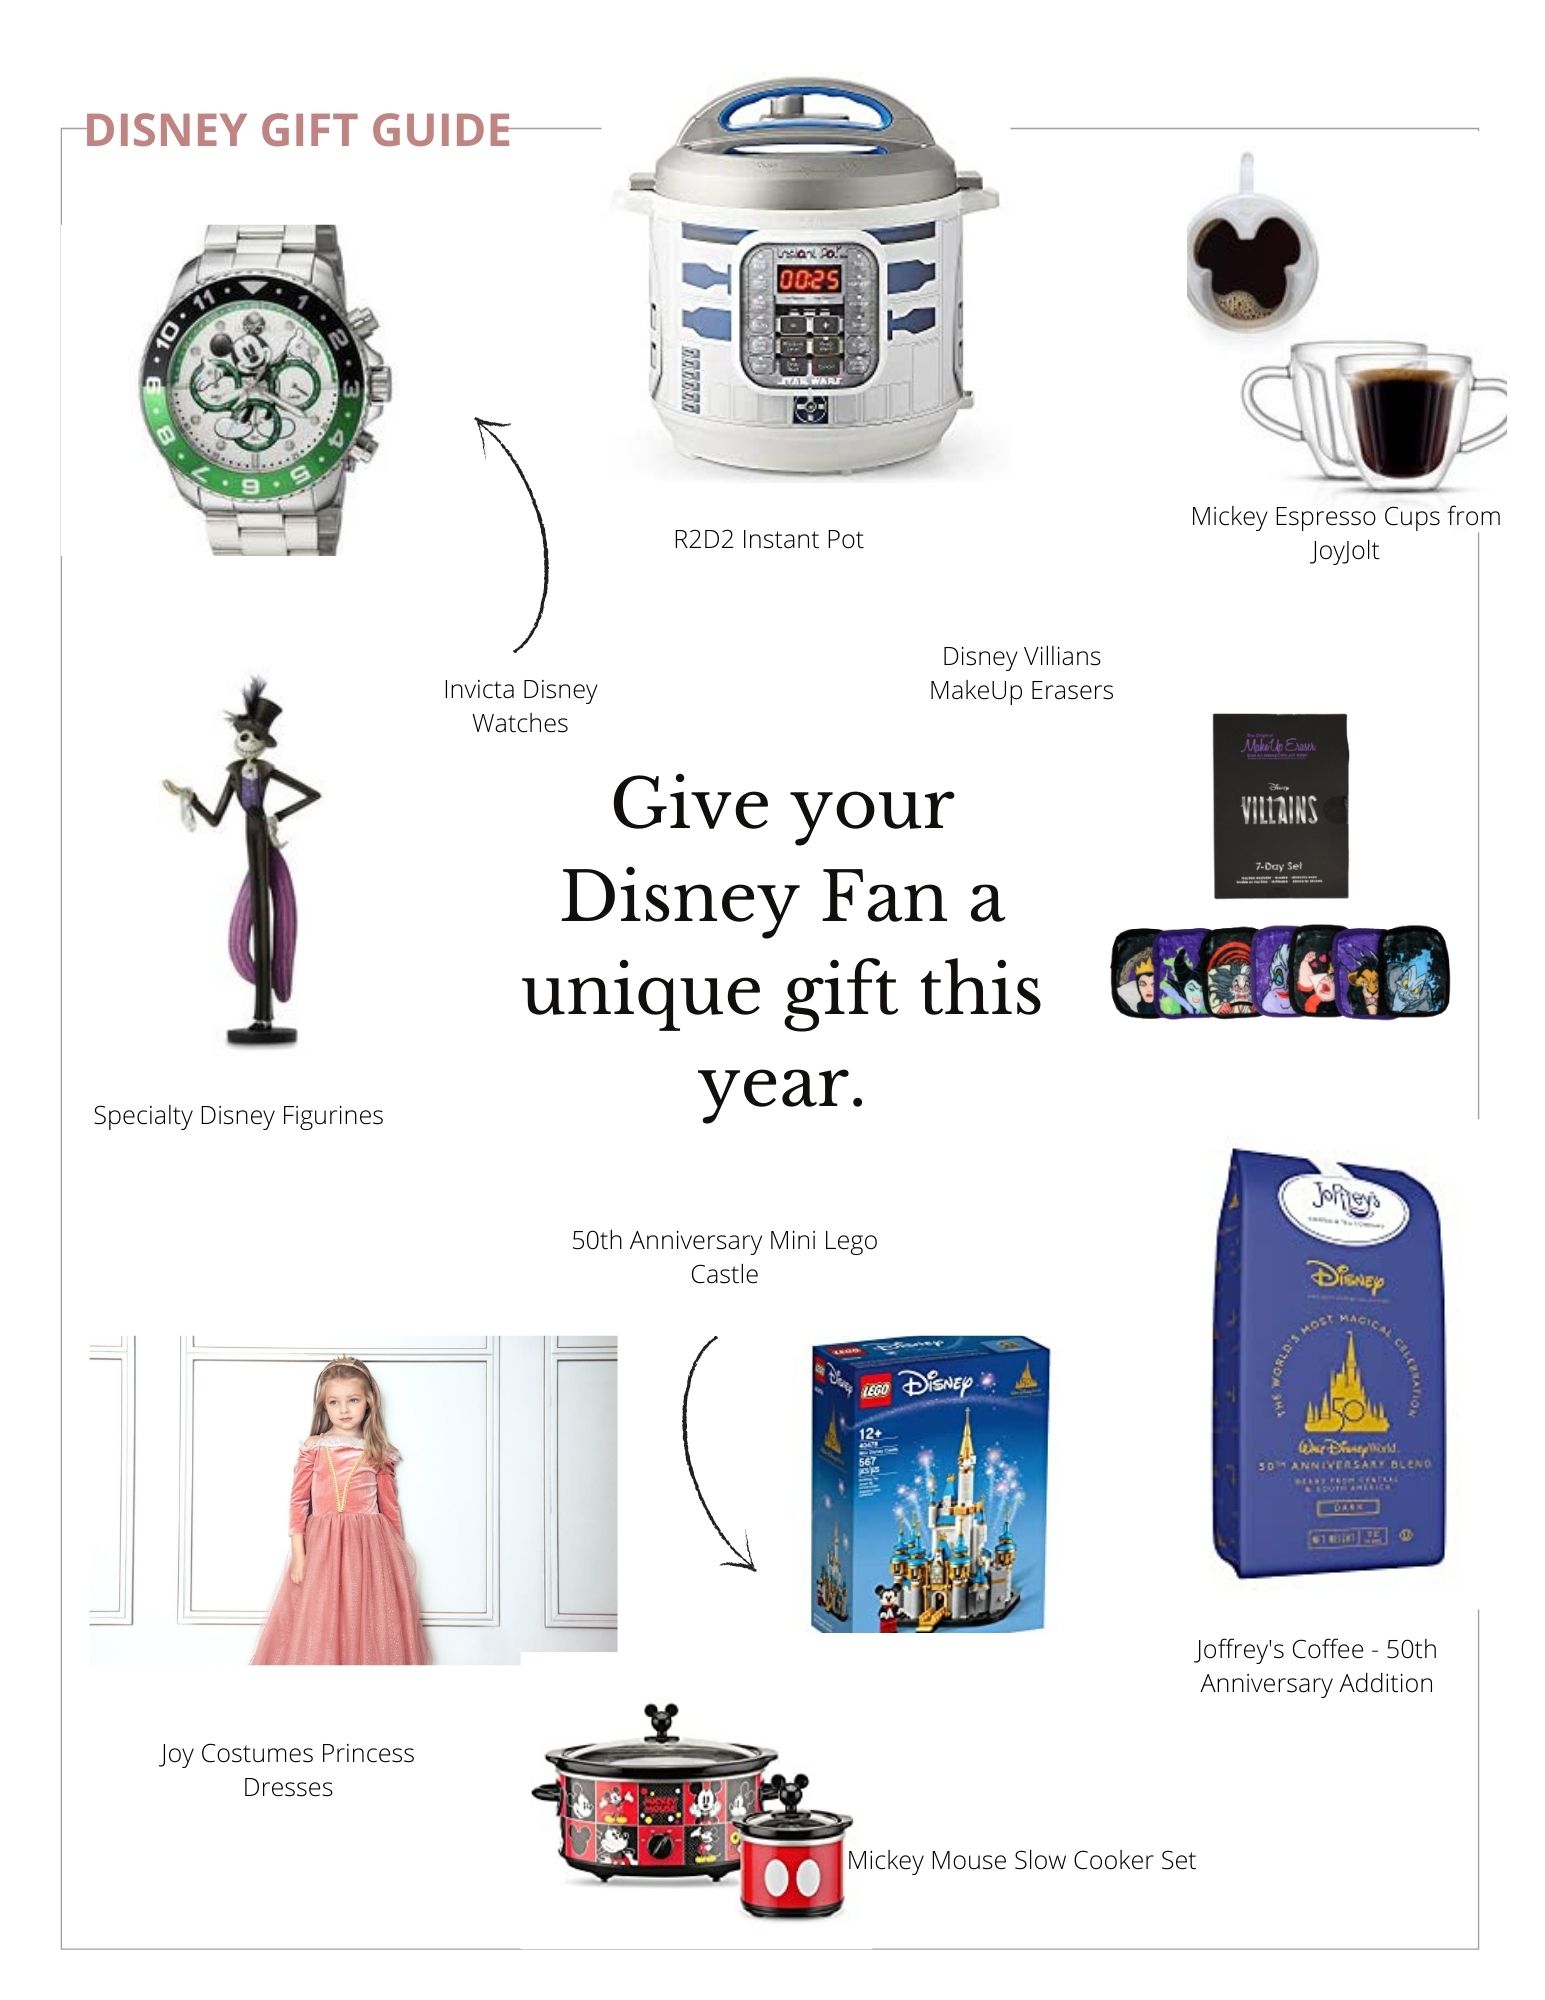 https://mommysmoviemagic.com/wp-content/uploads/2021/11/Copy-of-NS-Gift-Guide-Full-Size-1.jpg